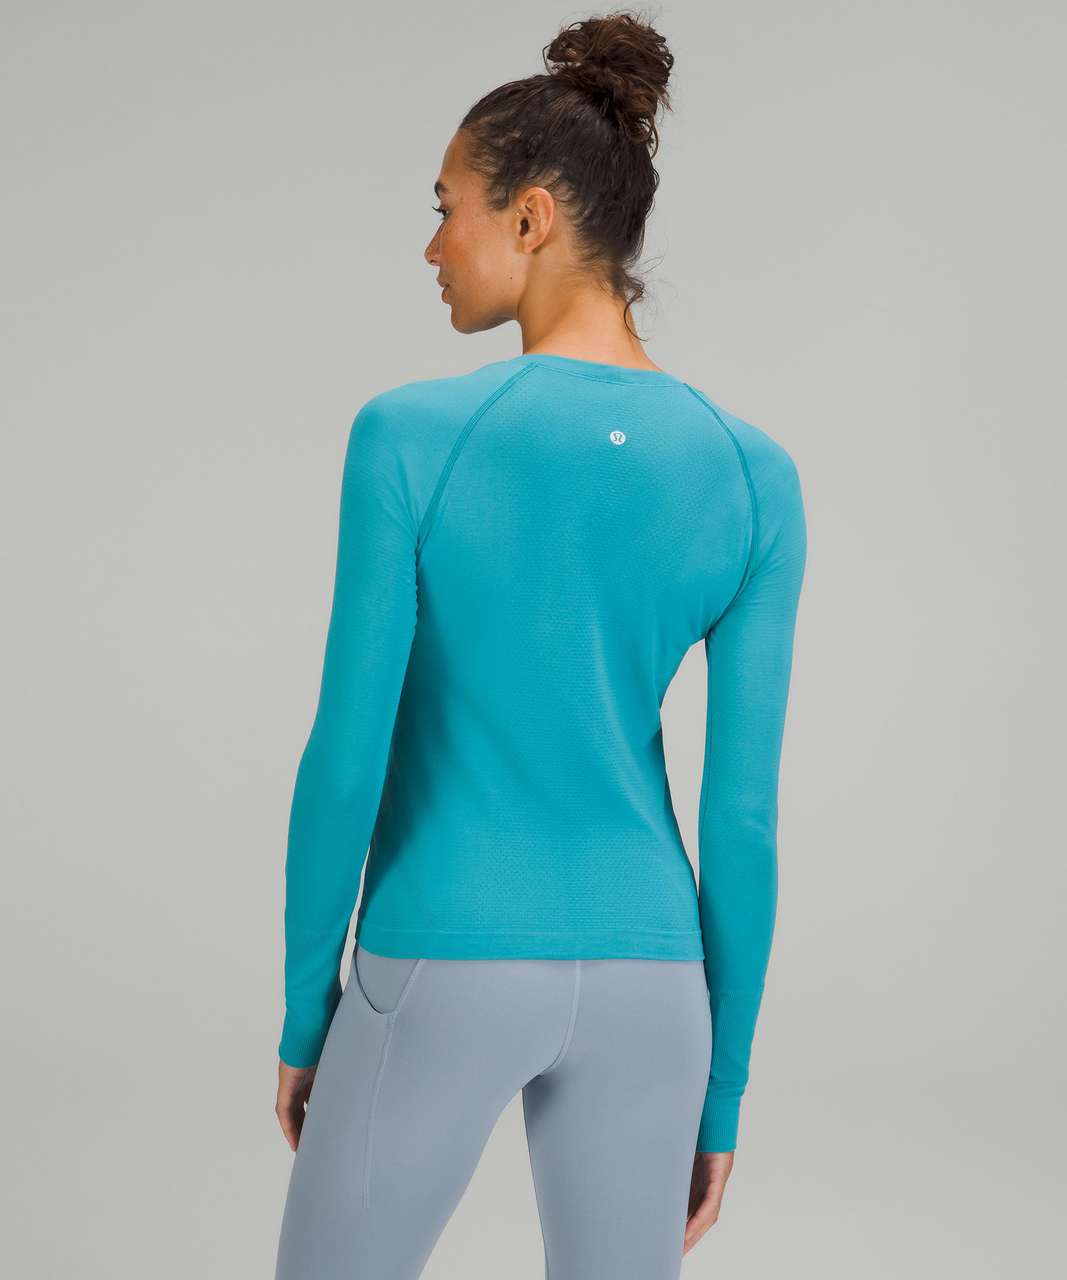 Swiftly tech long sleeve 2.0 race length and find your pace shorts 👌🏽 : r/ lululemon